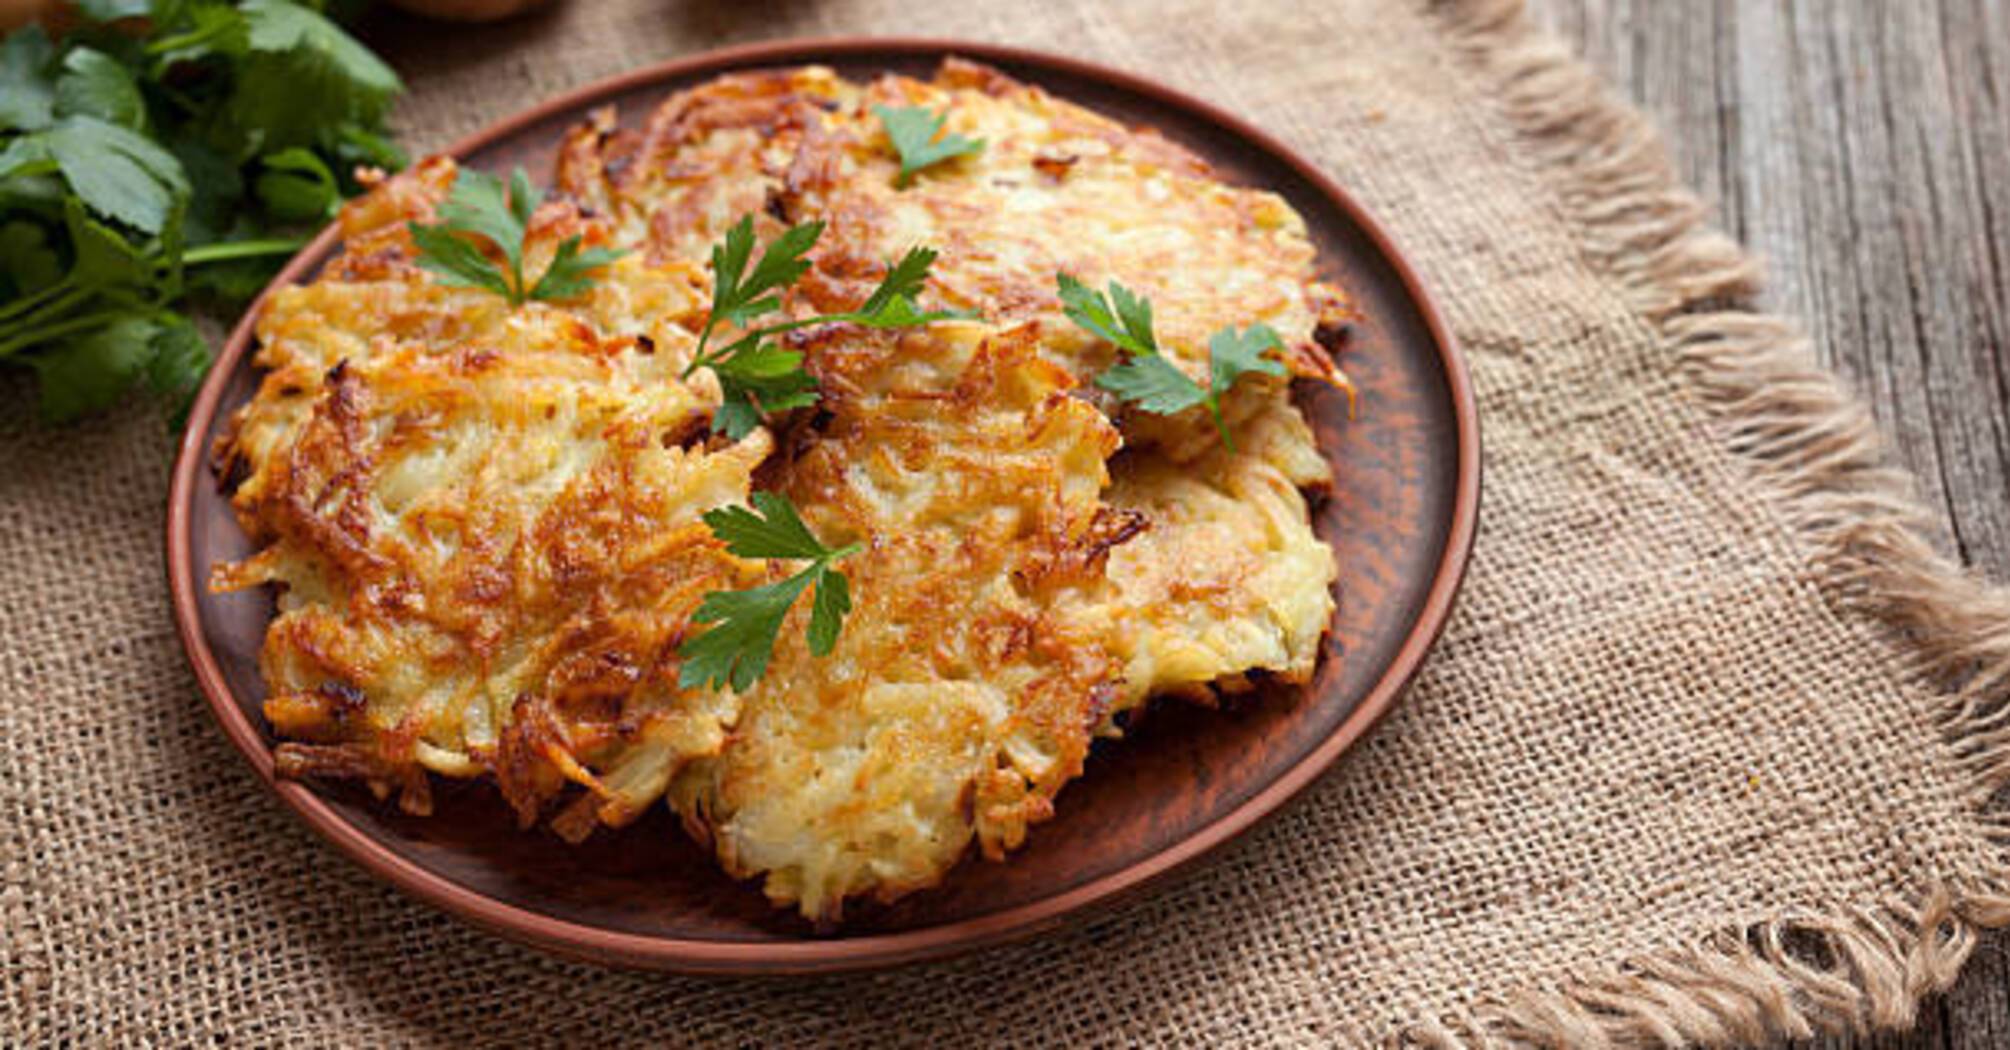 Baked potato pancakes in pots: how to prepare a familiar dish in a new way